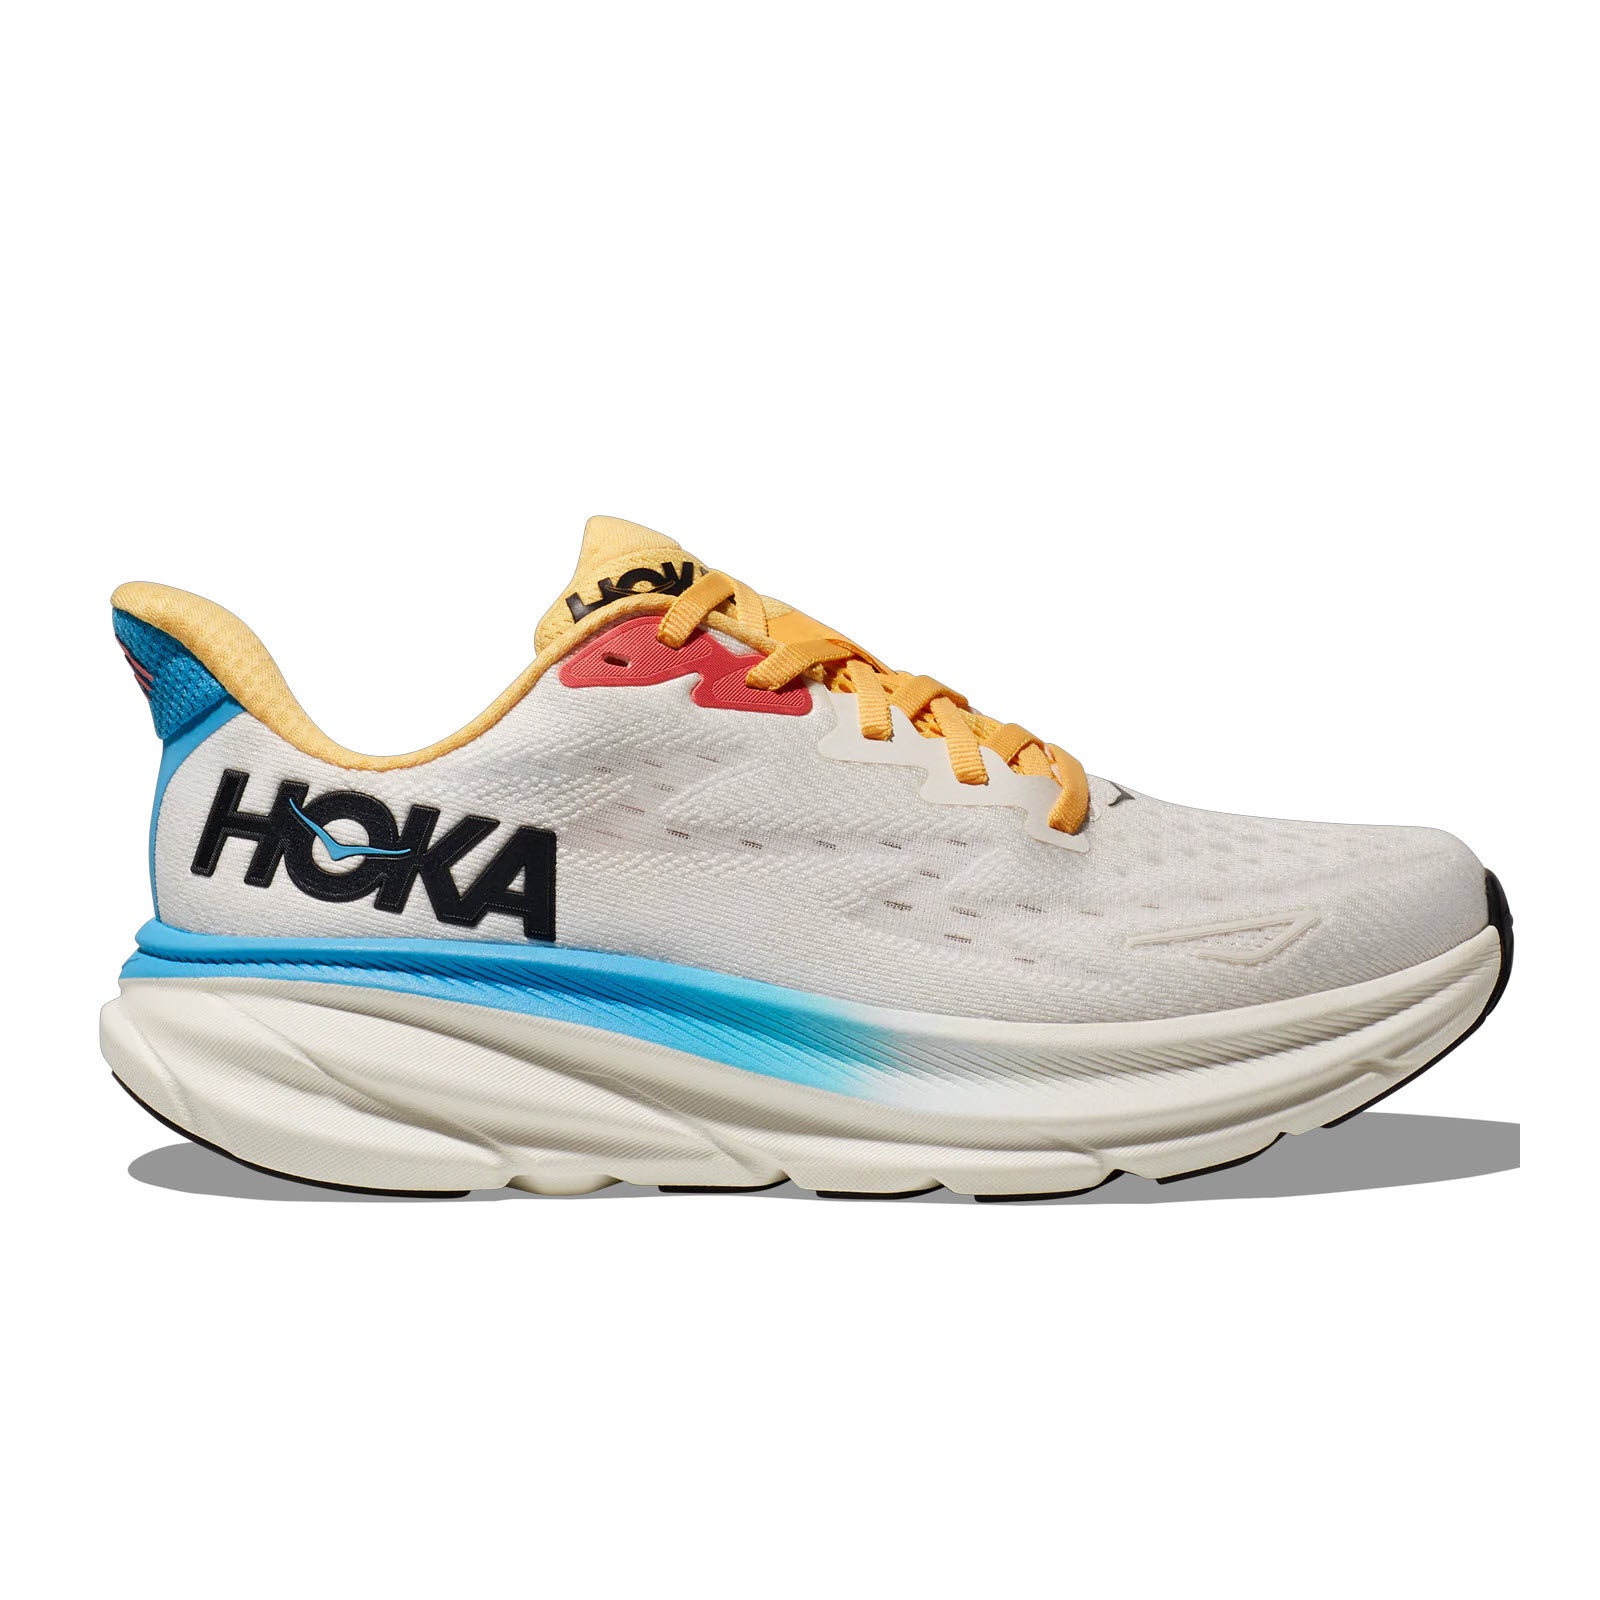 Side view of a Hoka CLIFTON 9 BLANC DE BLANC/SWIM DAY running shoe featuring a white and blue color scheme with bold text on the heel and multicolored laces, designed with a breathable engineered mesh.